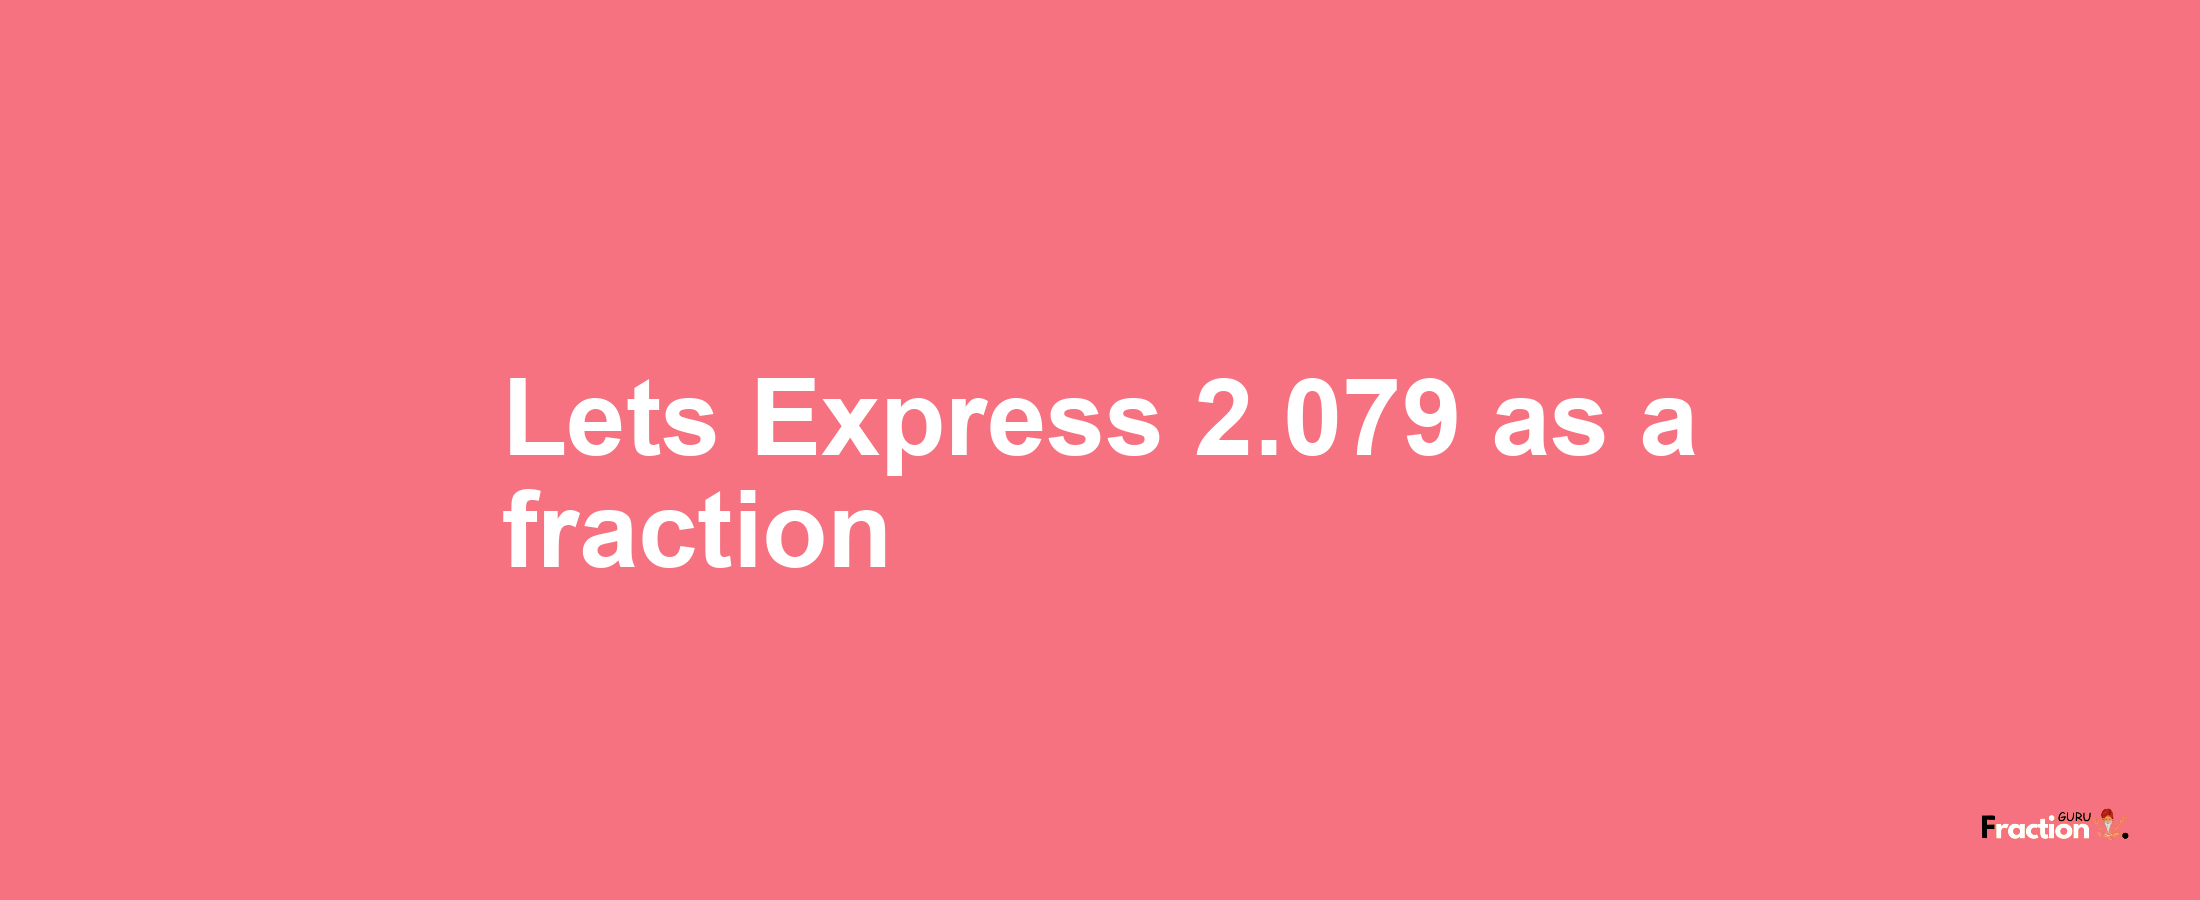 Lets Express 2.079 as afraction